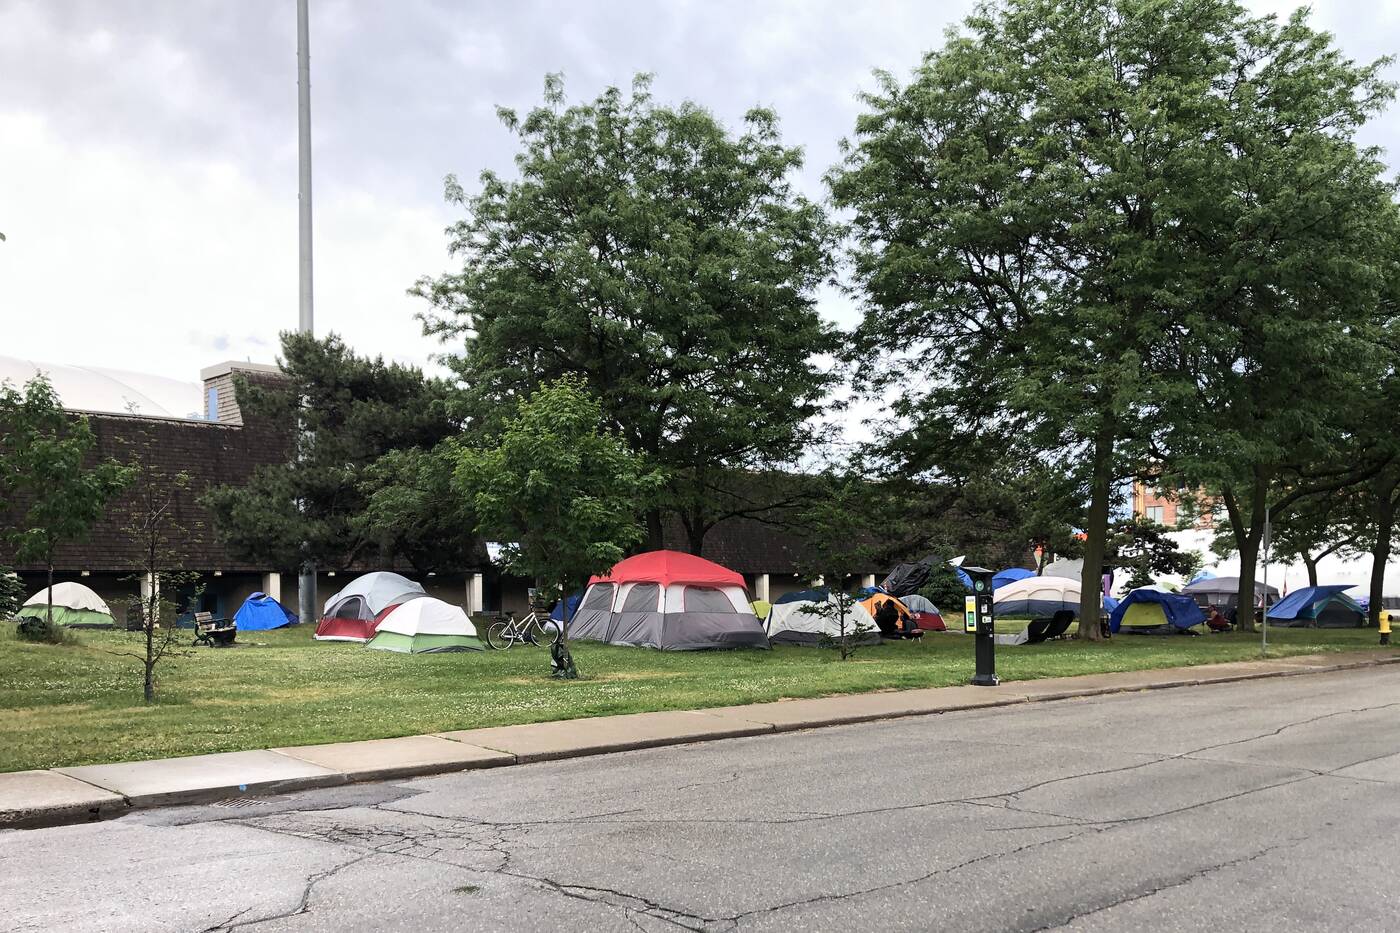 Doug Ford Says Homeless People Should Stop Pitching Tents In Toronto Parks